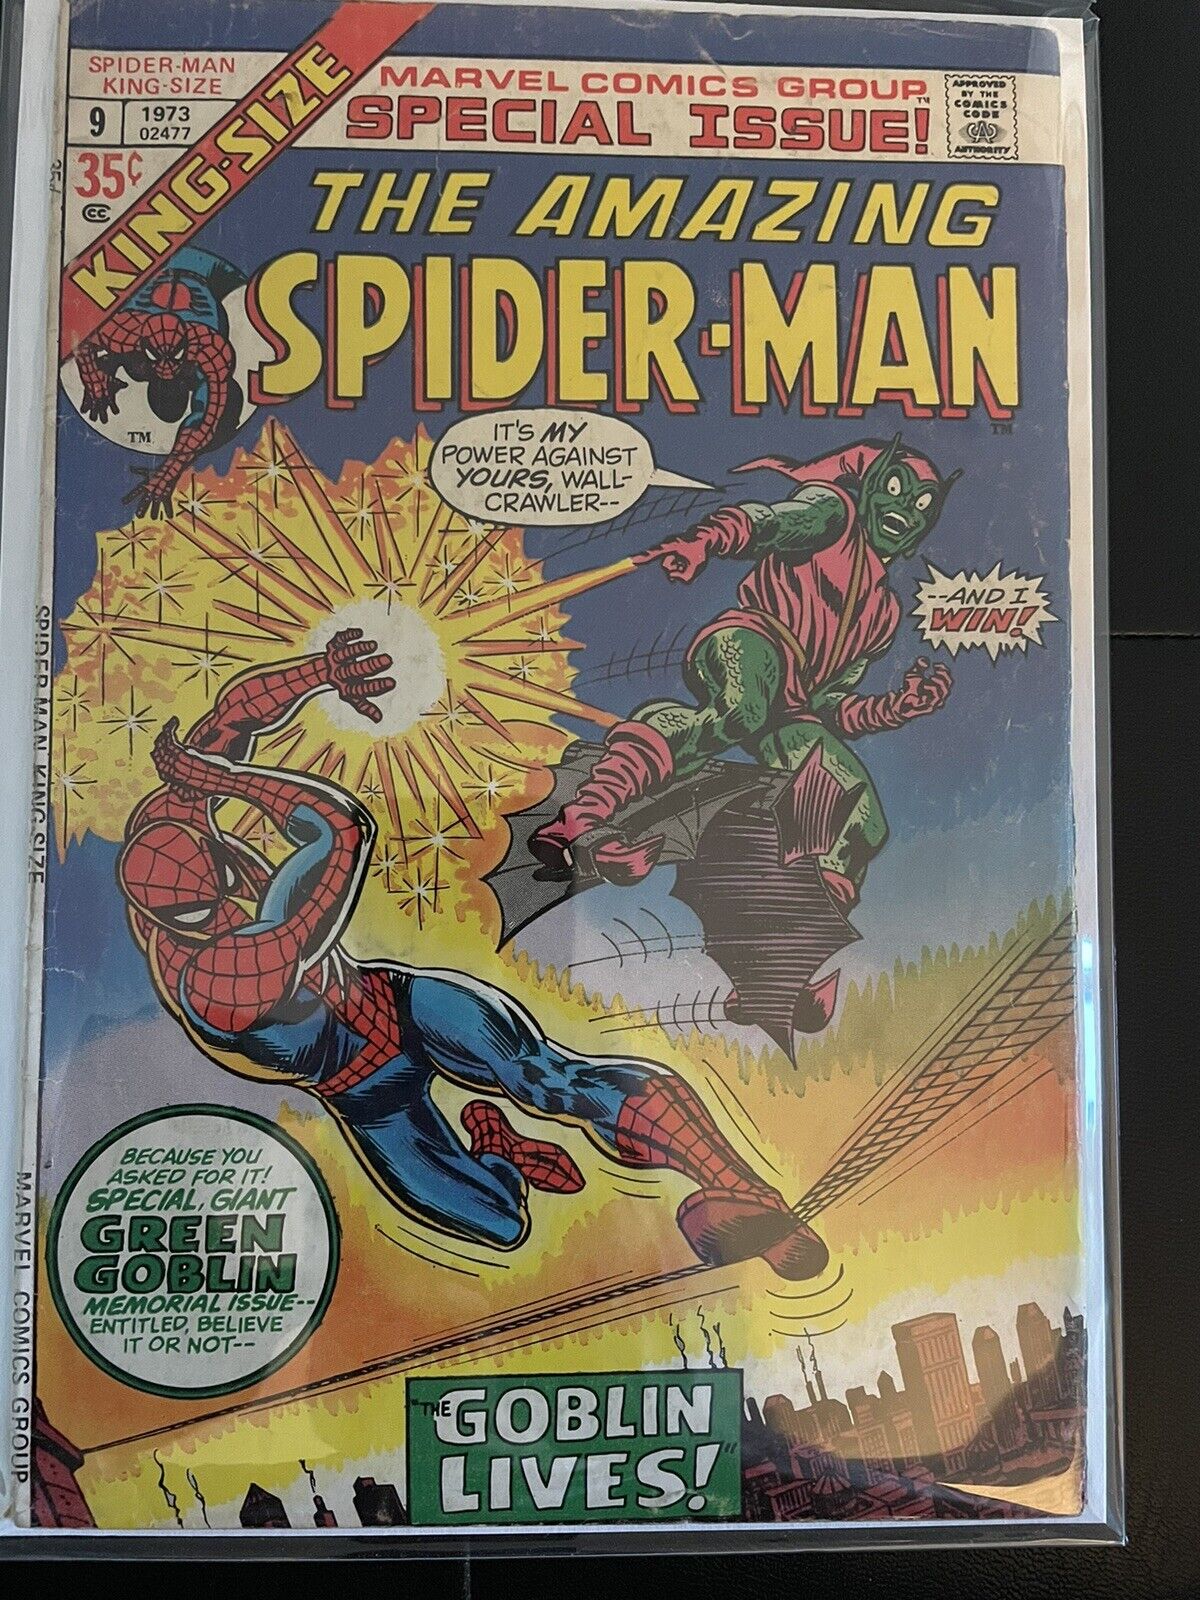 The Amazing Spider-Man King-Size Special Issue #9 (1973) The Green Goblin